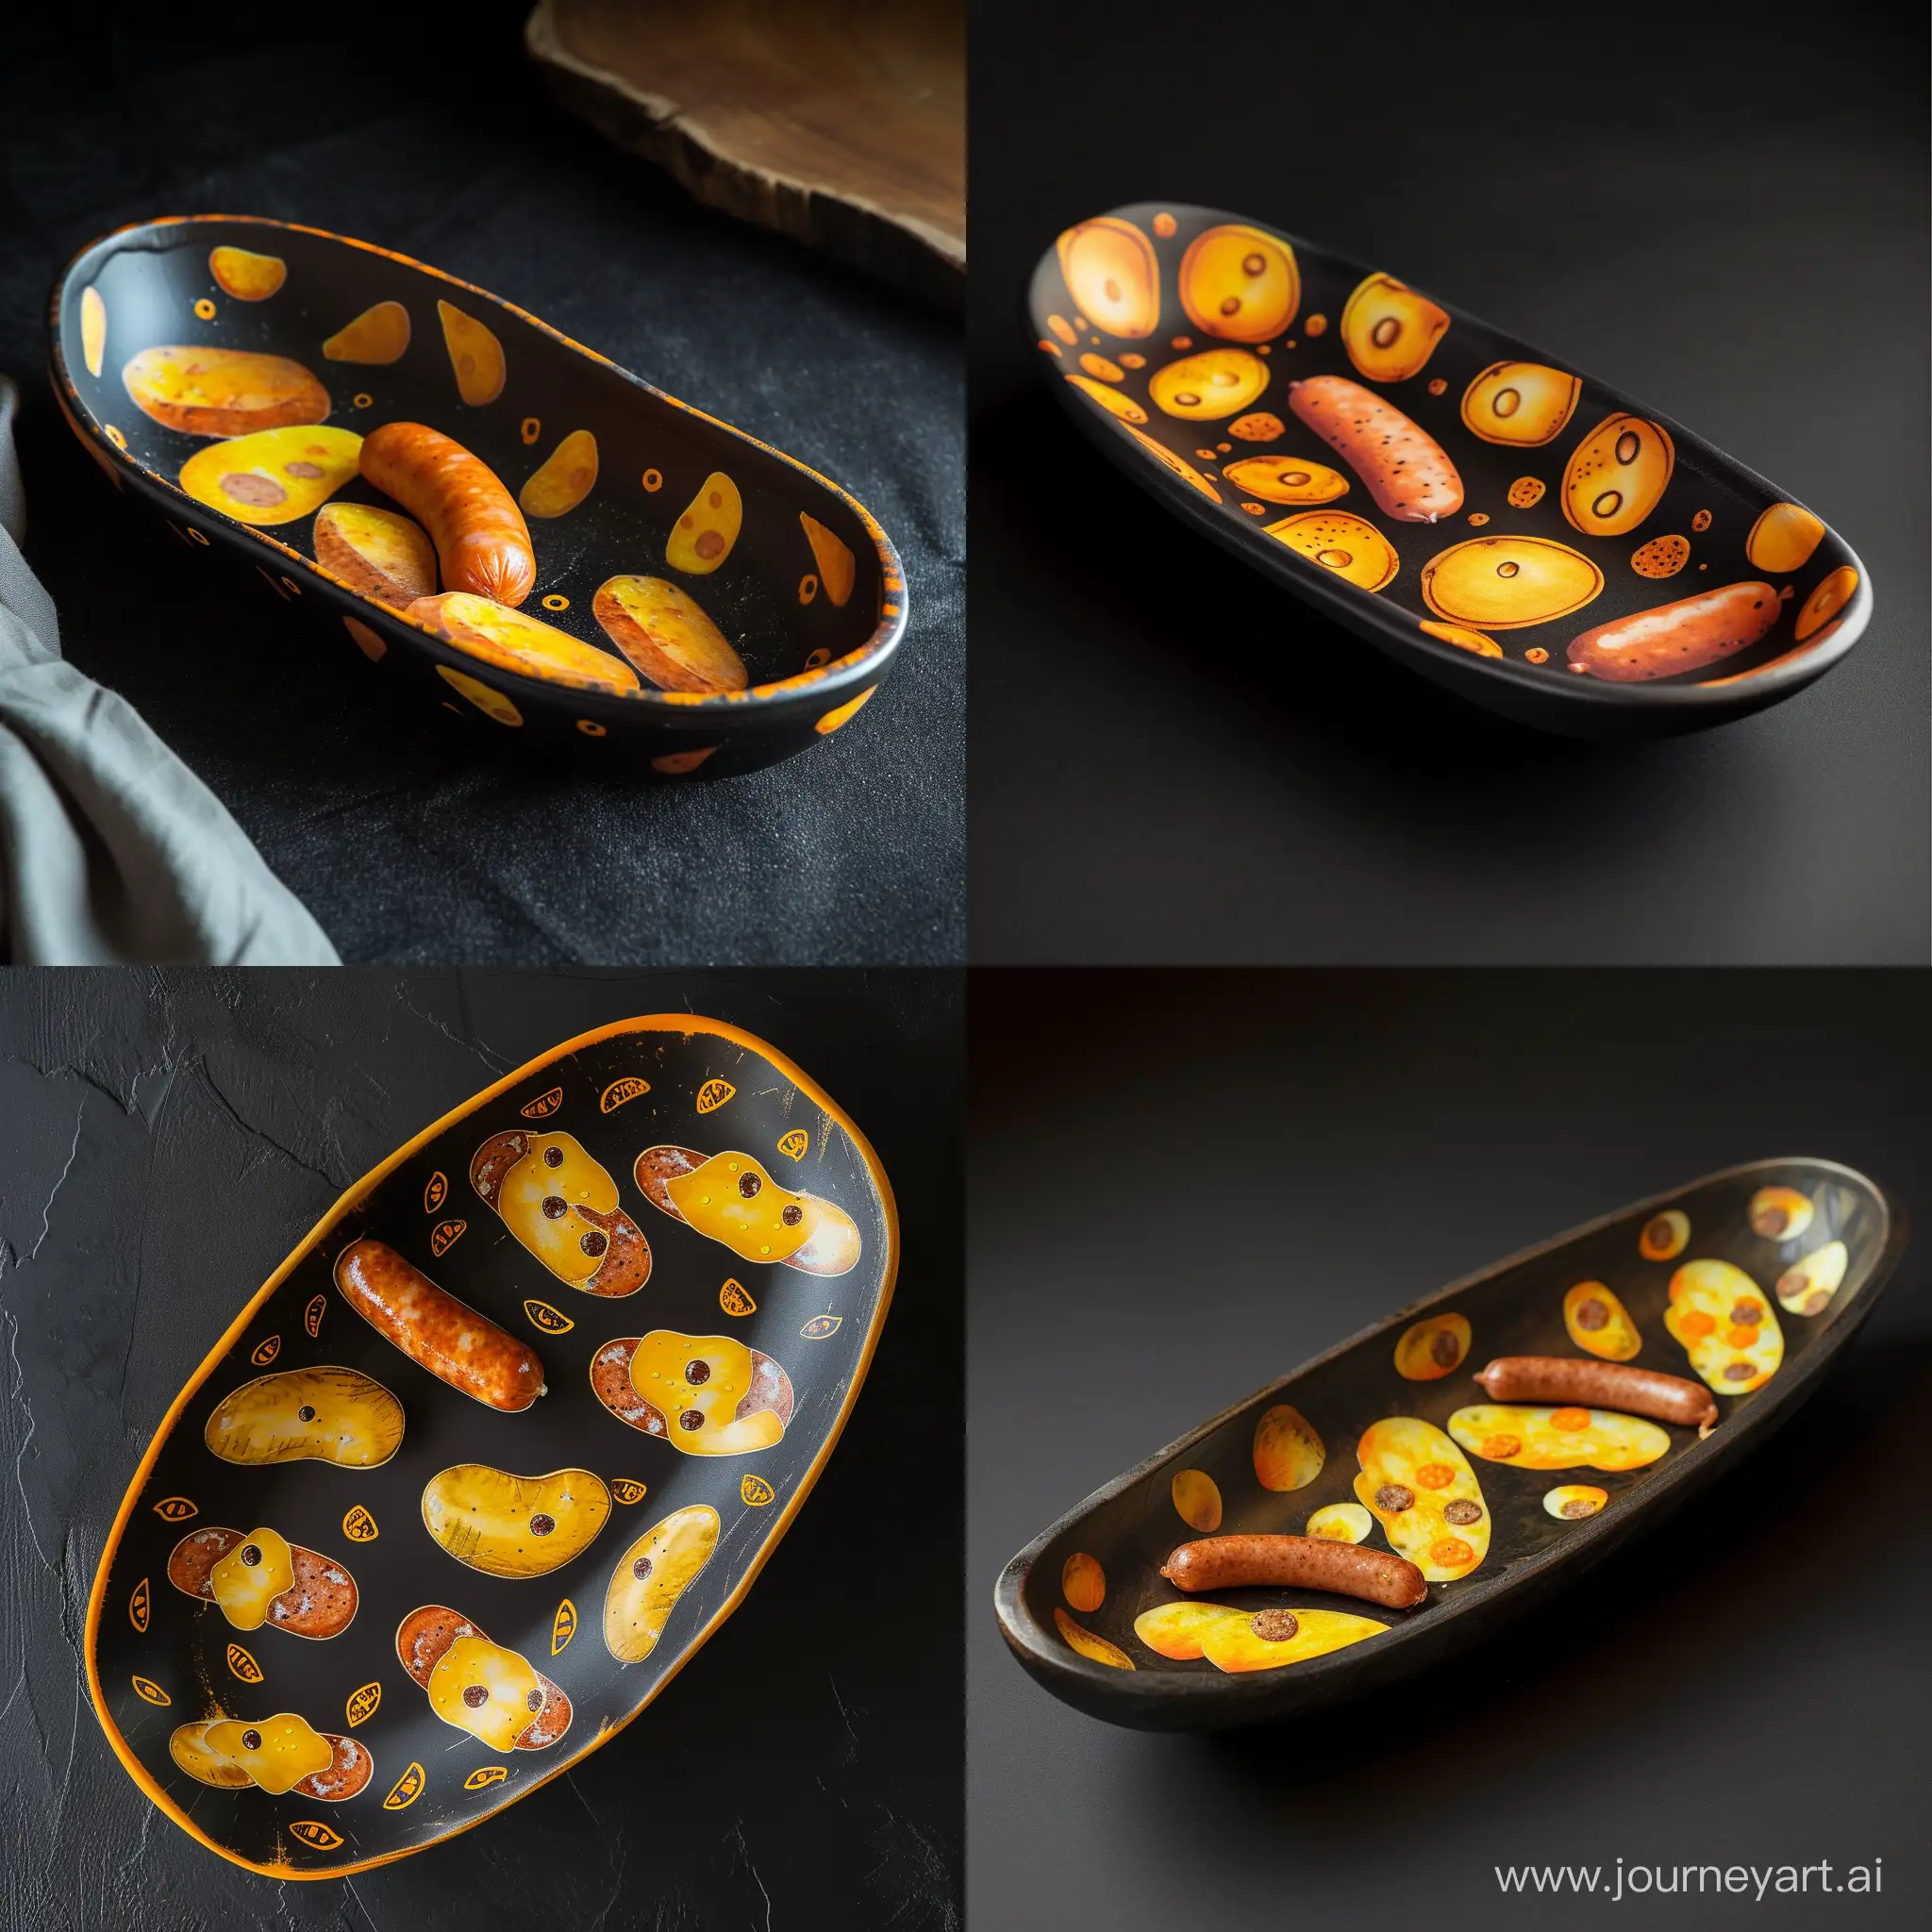 An empty Potato dish with a design on it with a beautiful matte black background. Small pictures of sausages and potatoes are designed on it in yellow and orange colors.